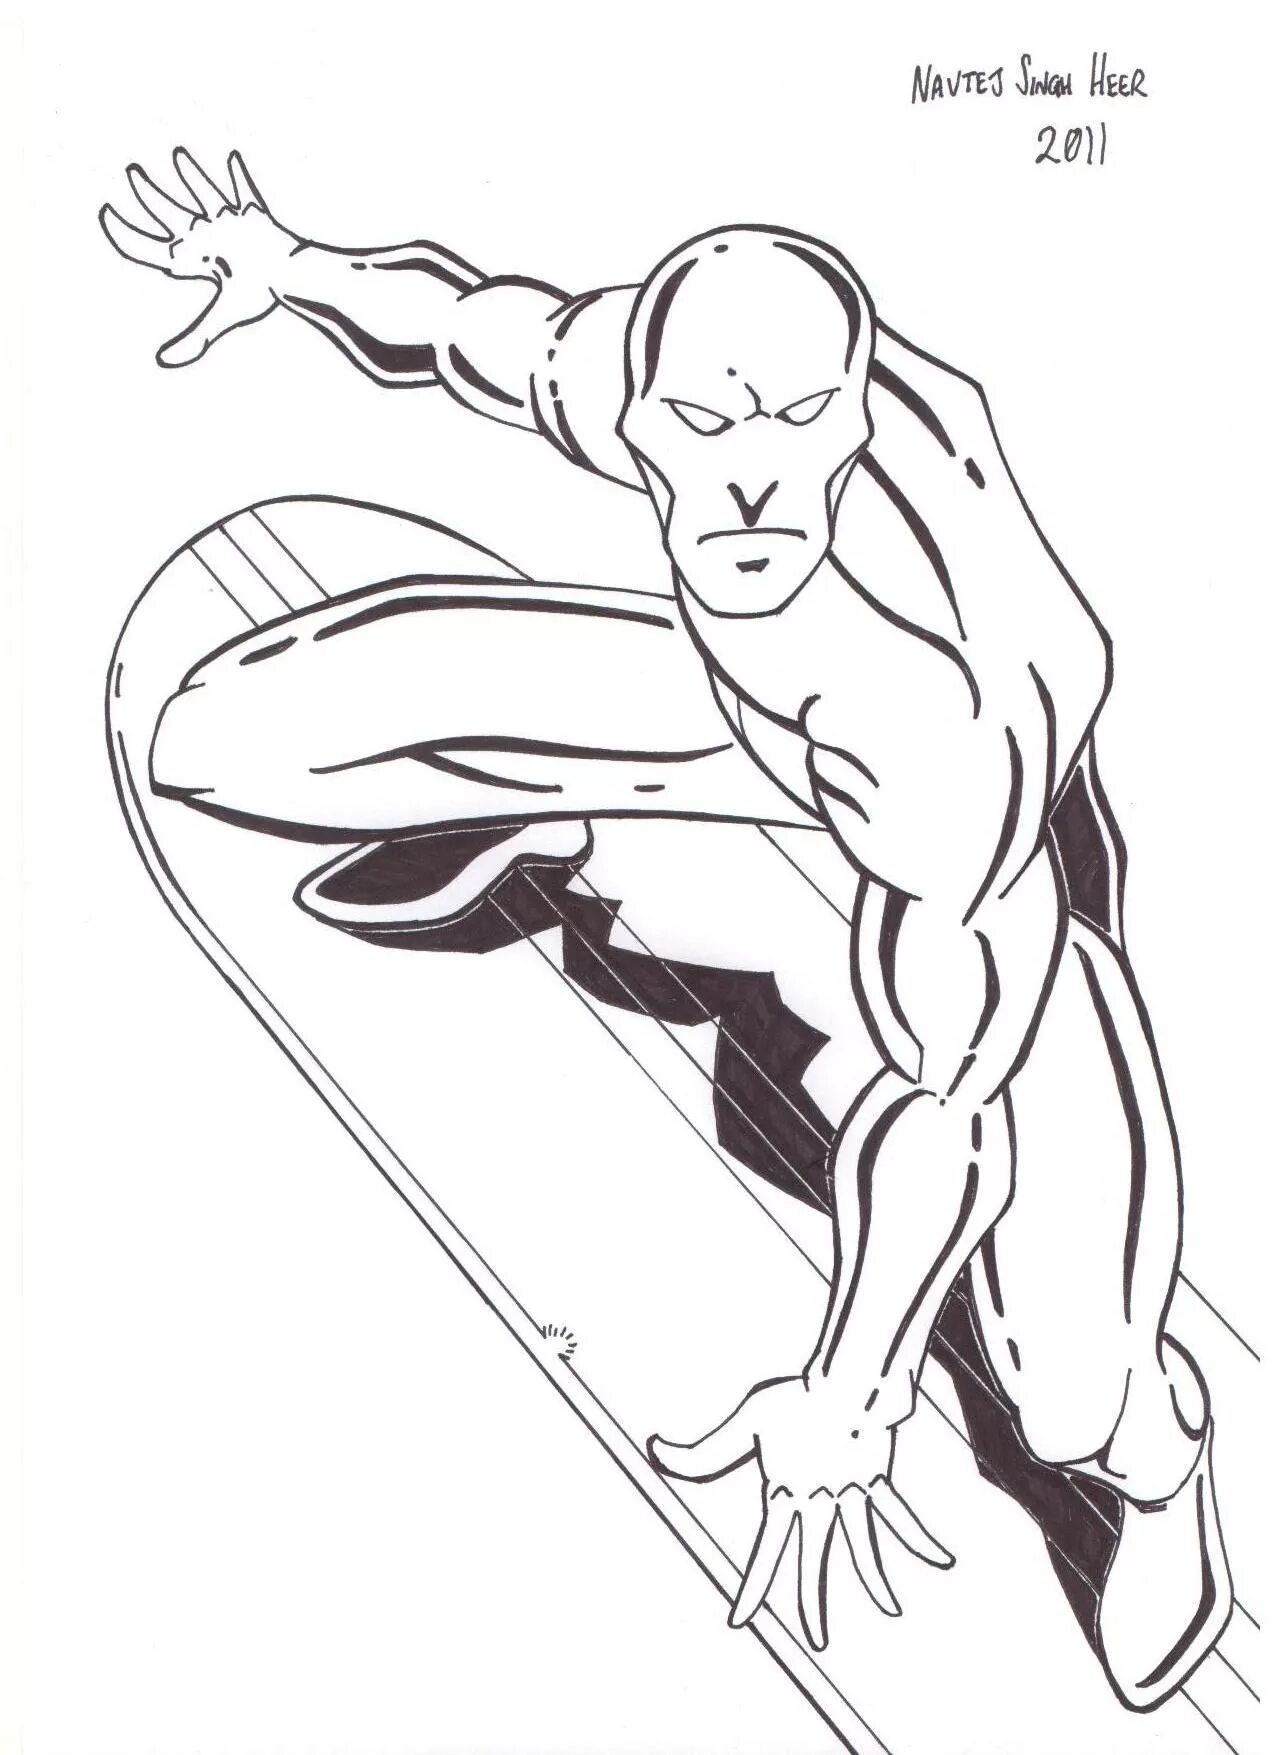 Rich silver surfer coloring page